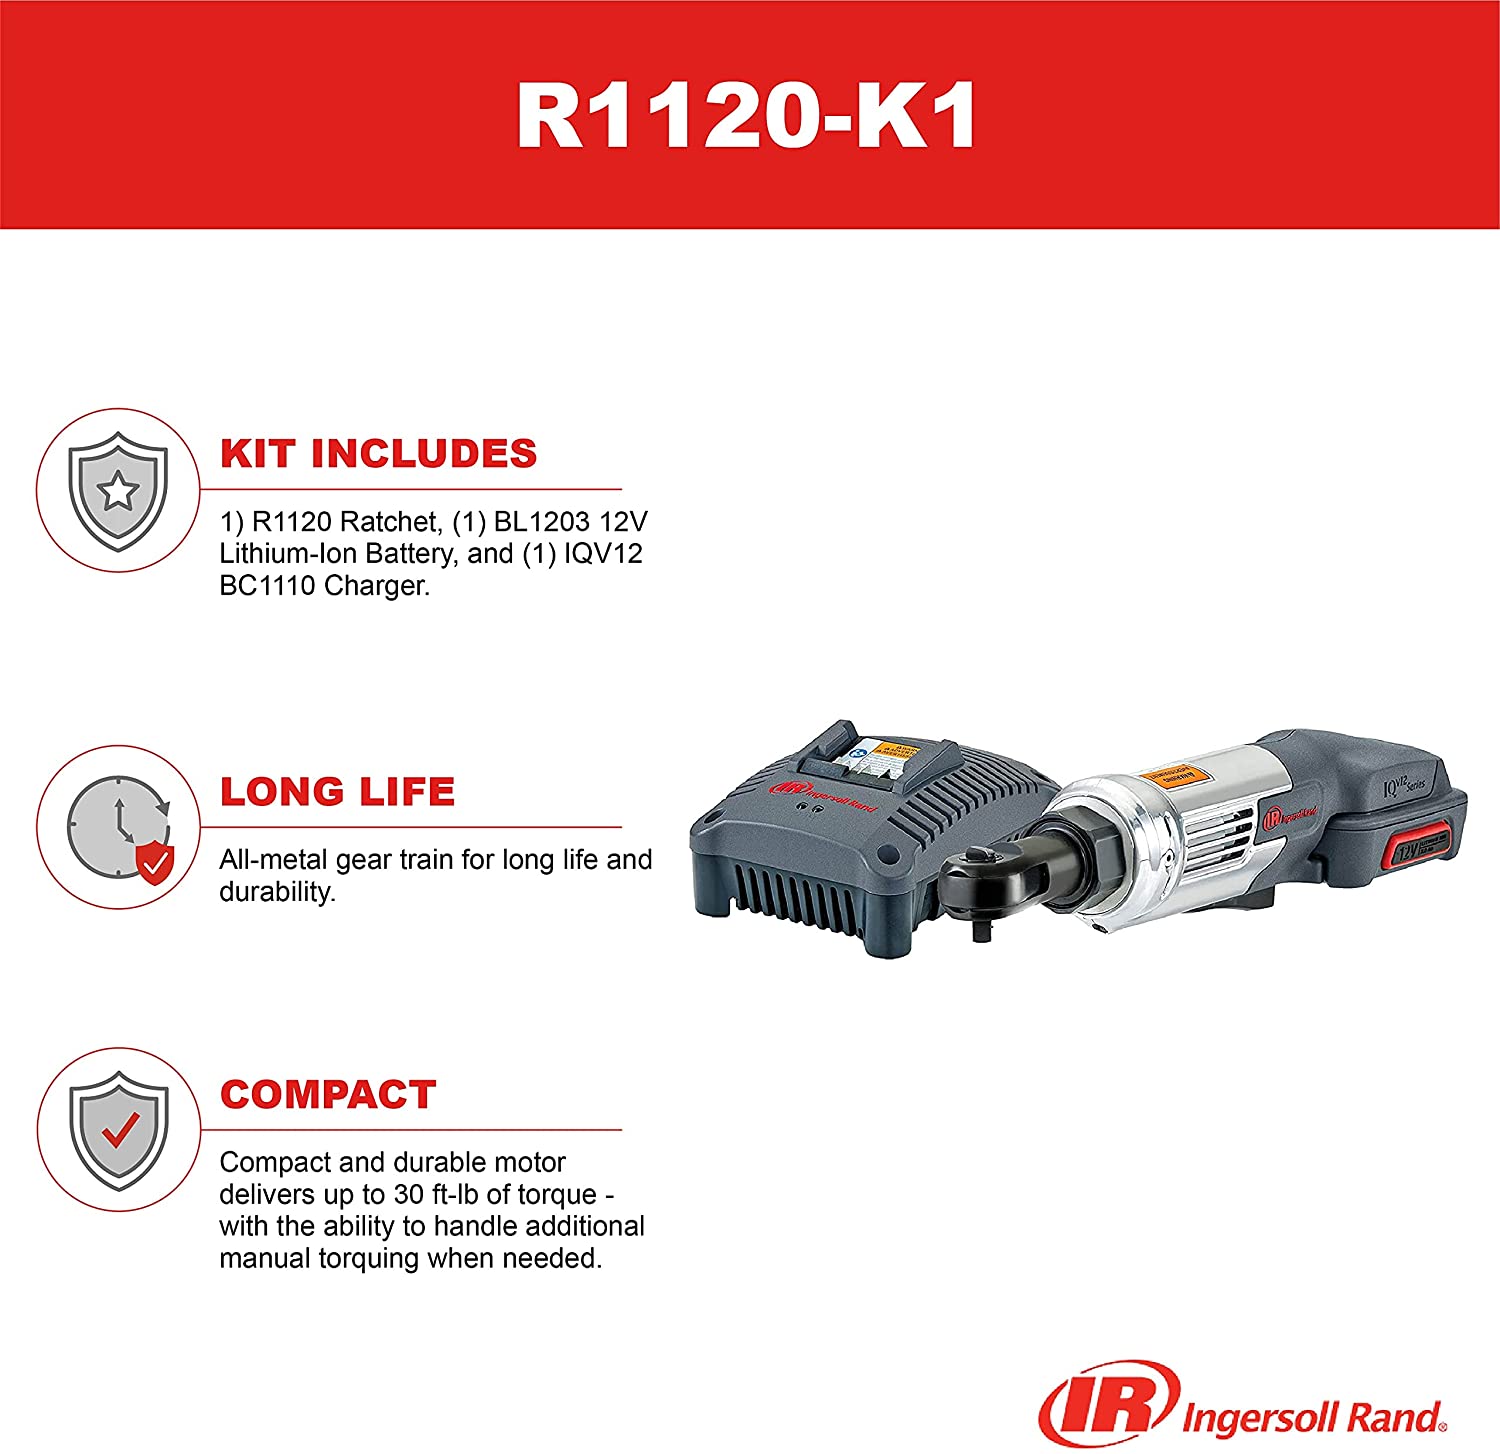 Ingersoll Rand R1120-K1 Cordless Ratchet Wrench pros and cons